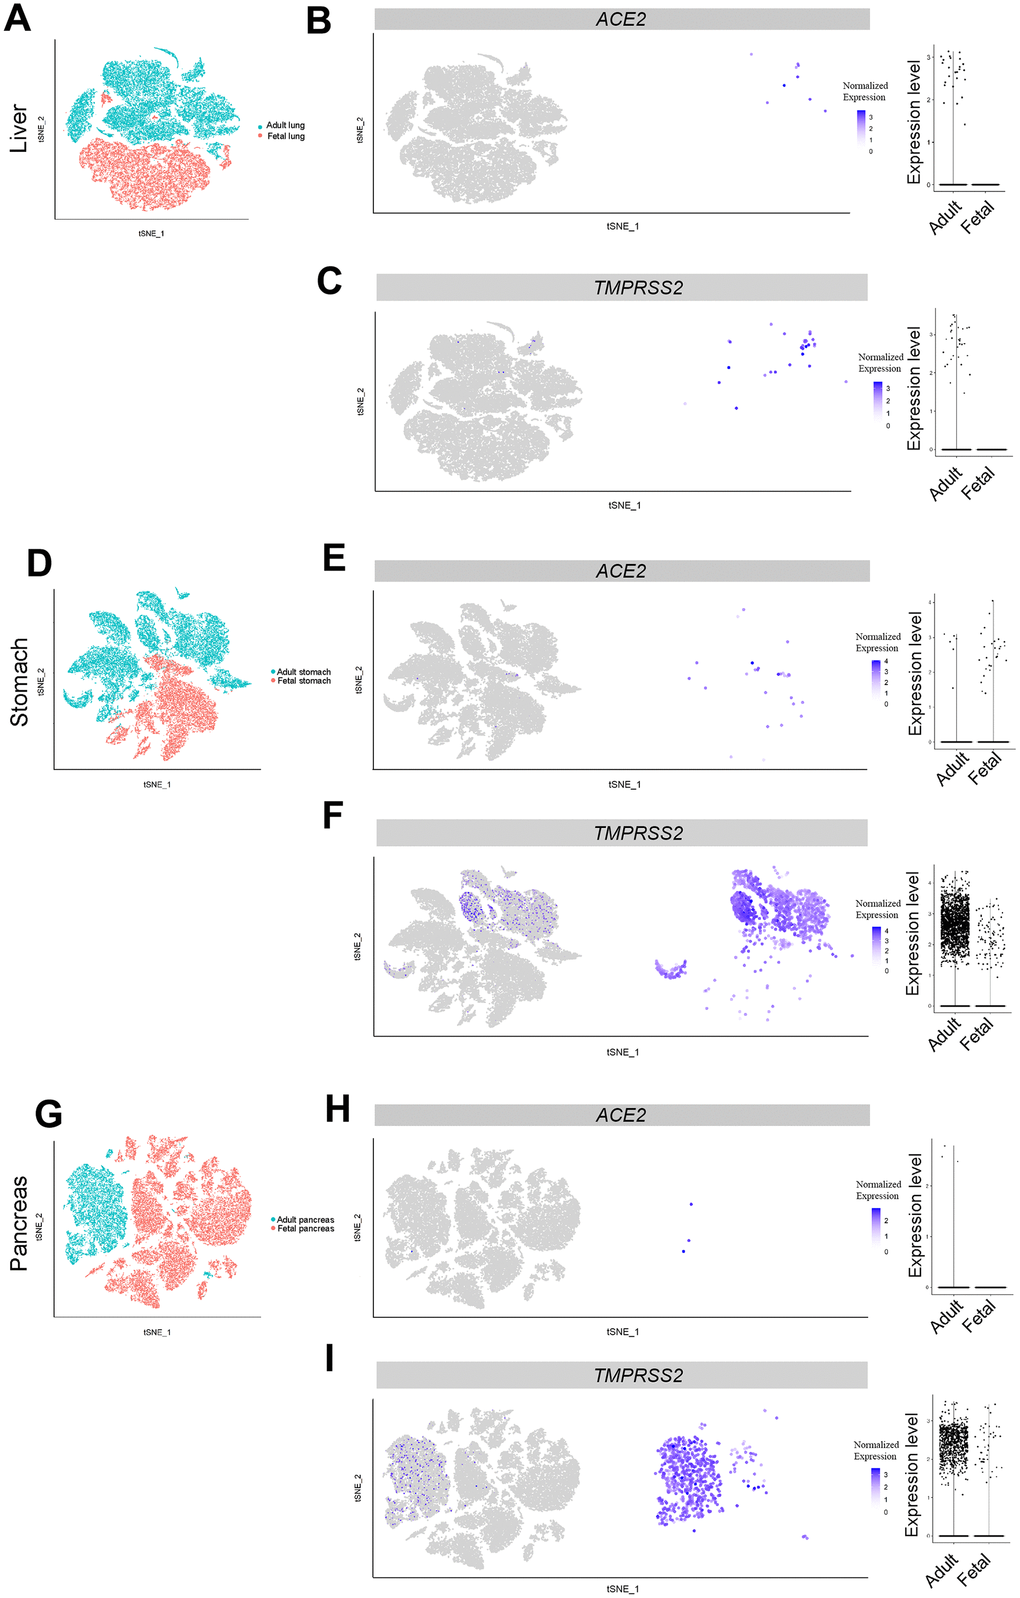 Single-cell analysis of liver, pancreas and stomach. (A) t-distributed stochastic neighbor embedding (TSNE) plot showing sub-clusters of liver cells, (B) ACE2 and (C) TMPRSS2 expression in liver from the adult and fetal groups. (D) TSNE plot showing sub-clusters of stomach cells, (E) ACE2 and (F) TMPRSS2 expression in stomach from the adult and fetal groups. (G) TSNE plot showing sub-clusters of pancreas cells, (H) ACE2 and (I) TMPRSS2 expression in pancreas from the adult and fetal groups.